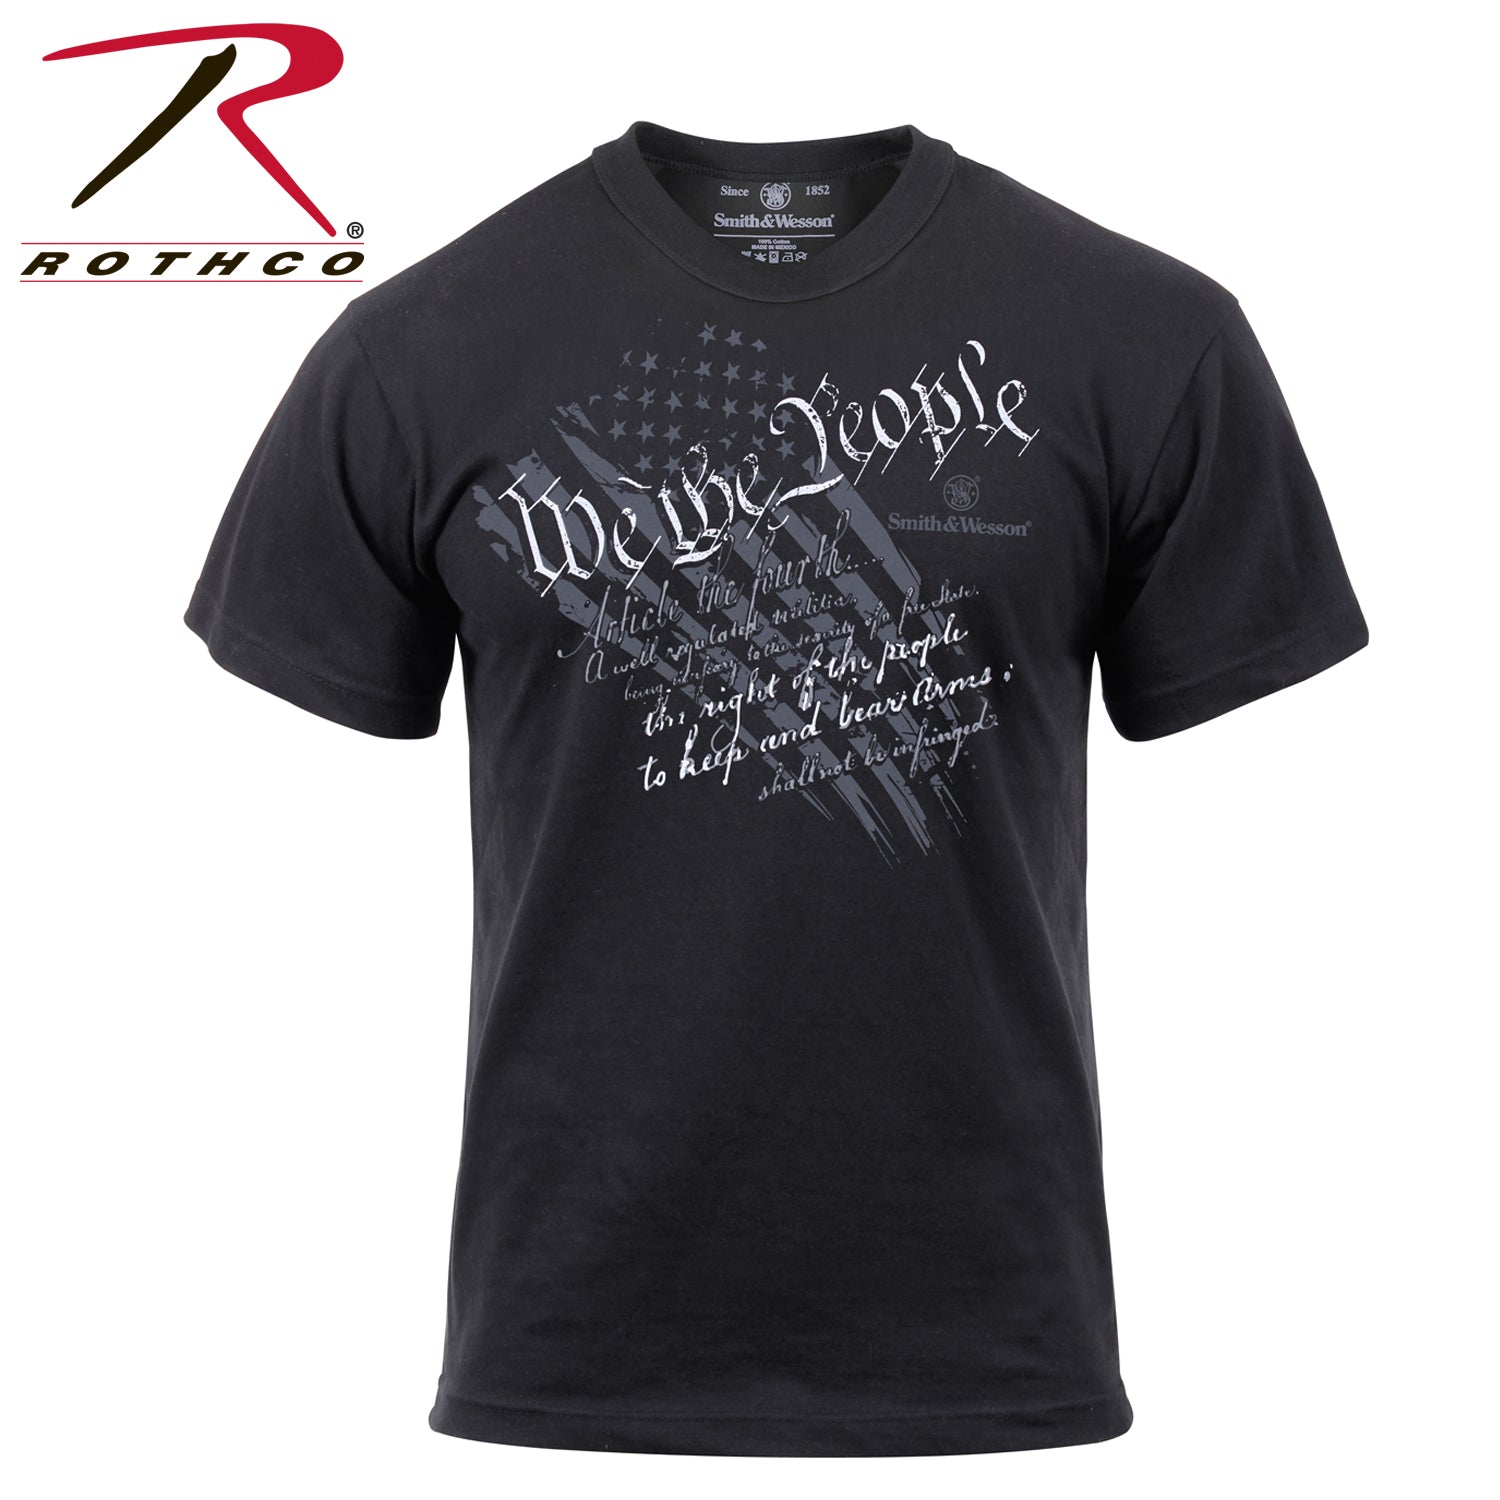 Smith & Wesson "We The People" T-Shirt